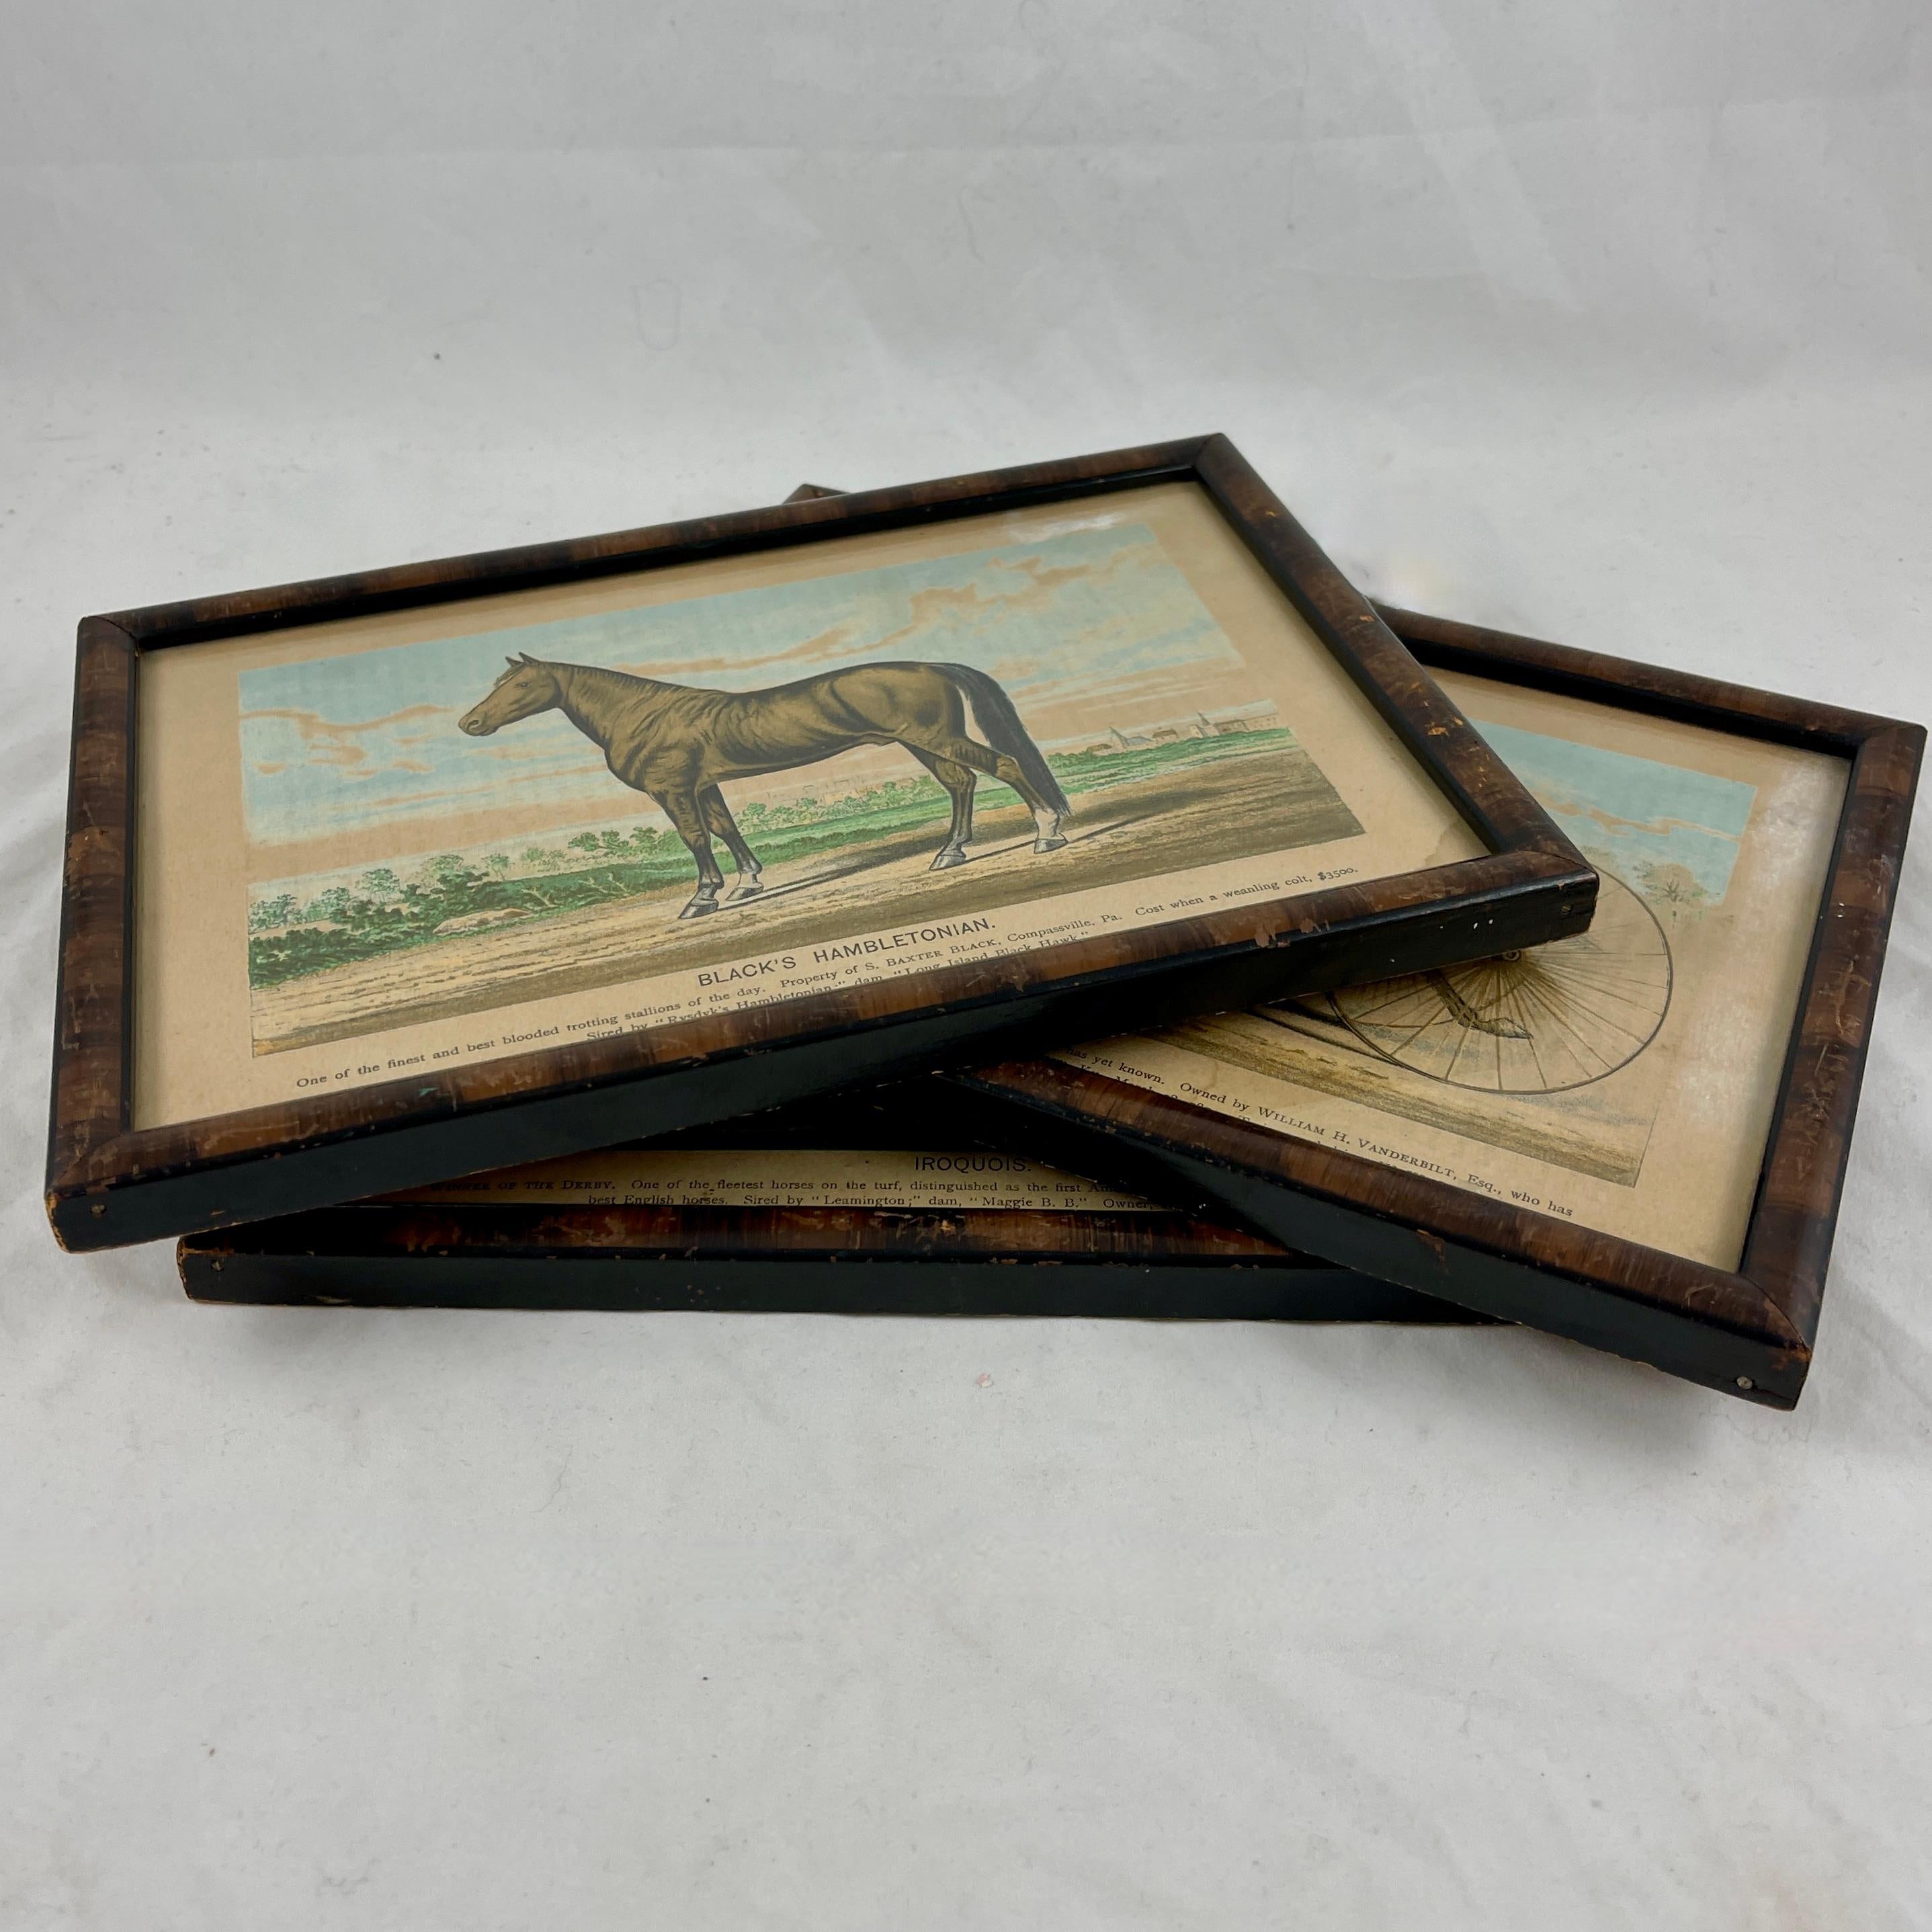 American Classical Framed Race Horse Champions Original Chromolithographs Printed in 1882, Set /3 For Sale